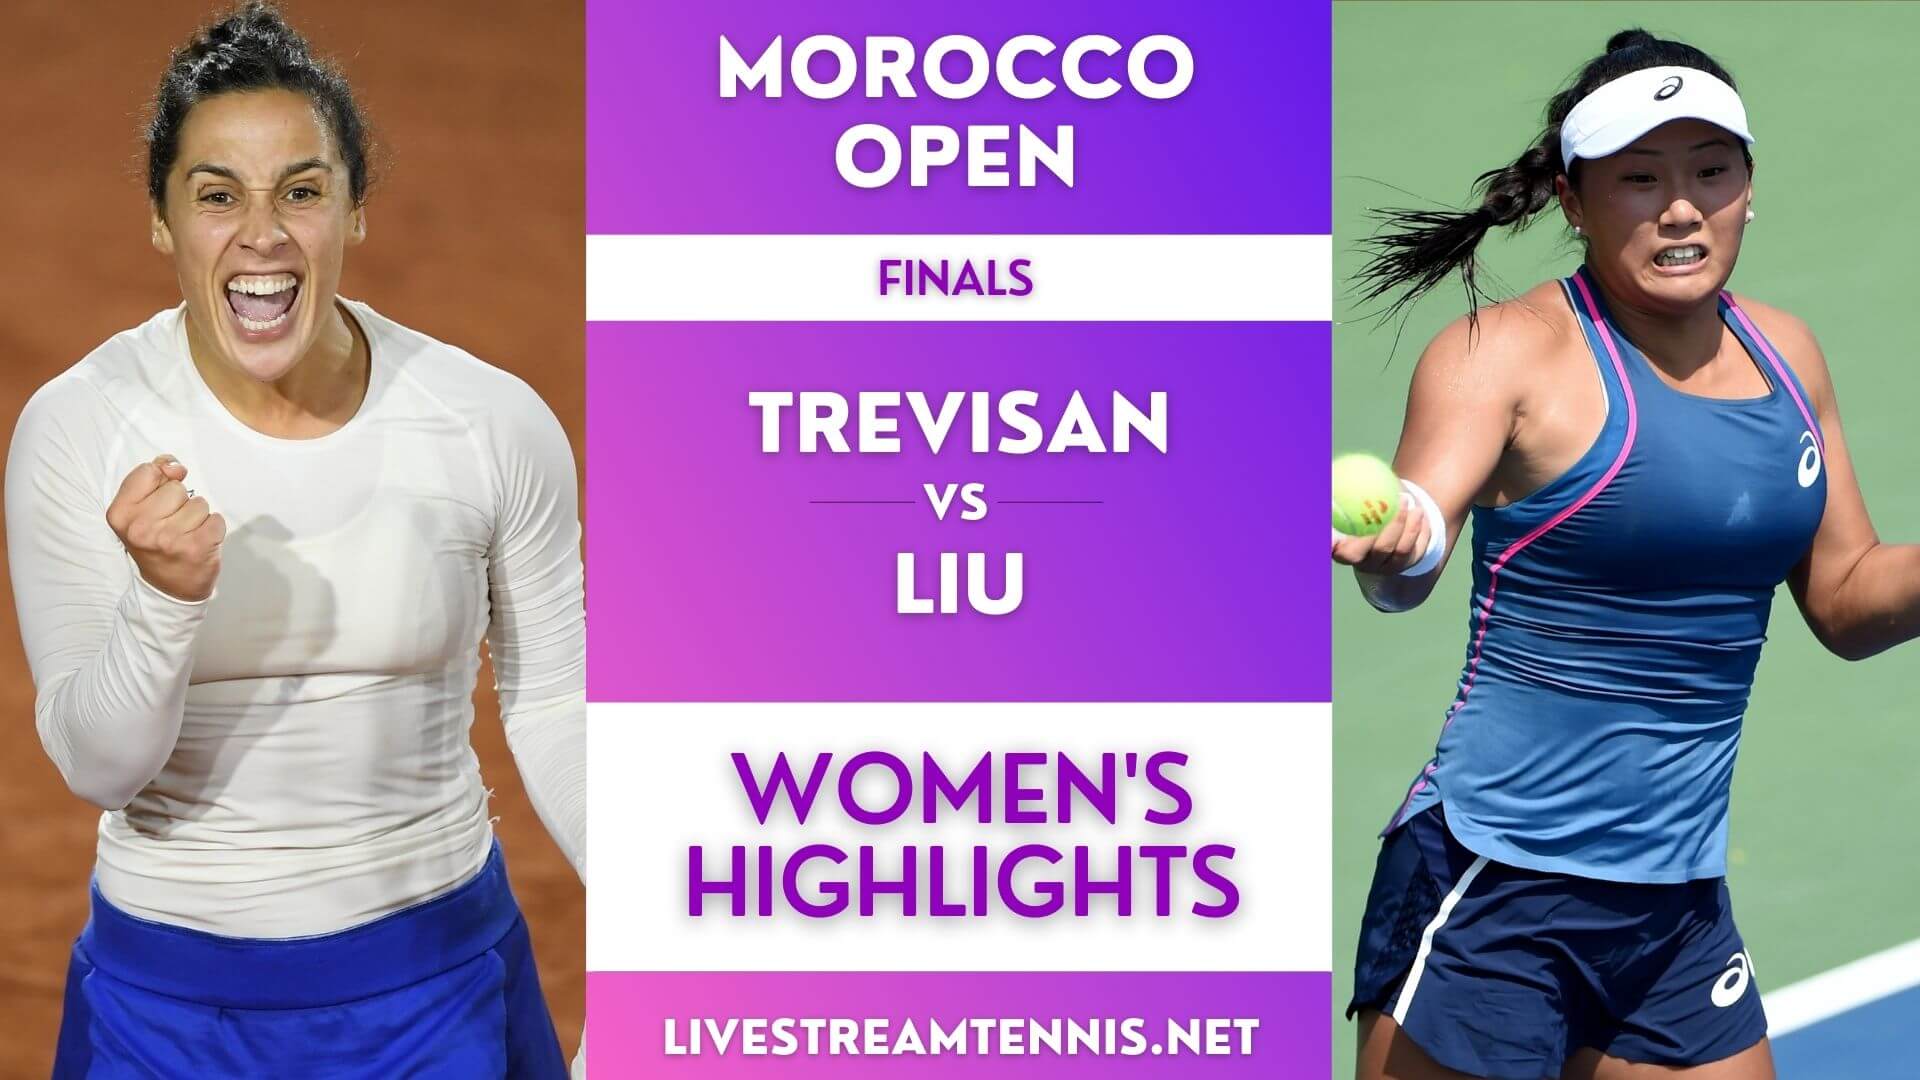 Morocco Open Ladies Final Highlights 2022